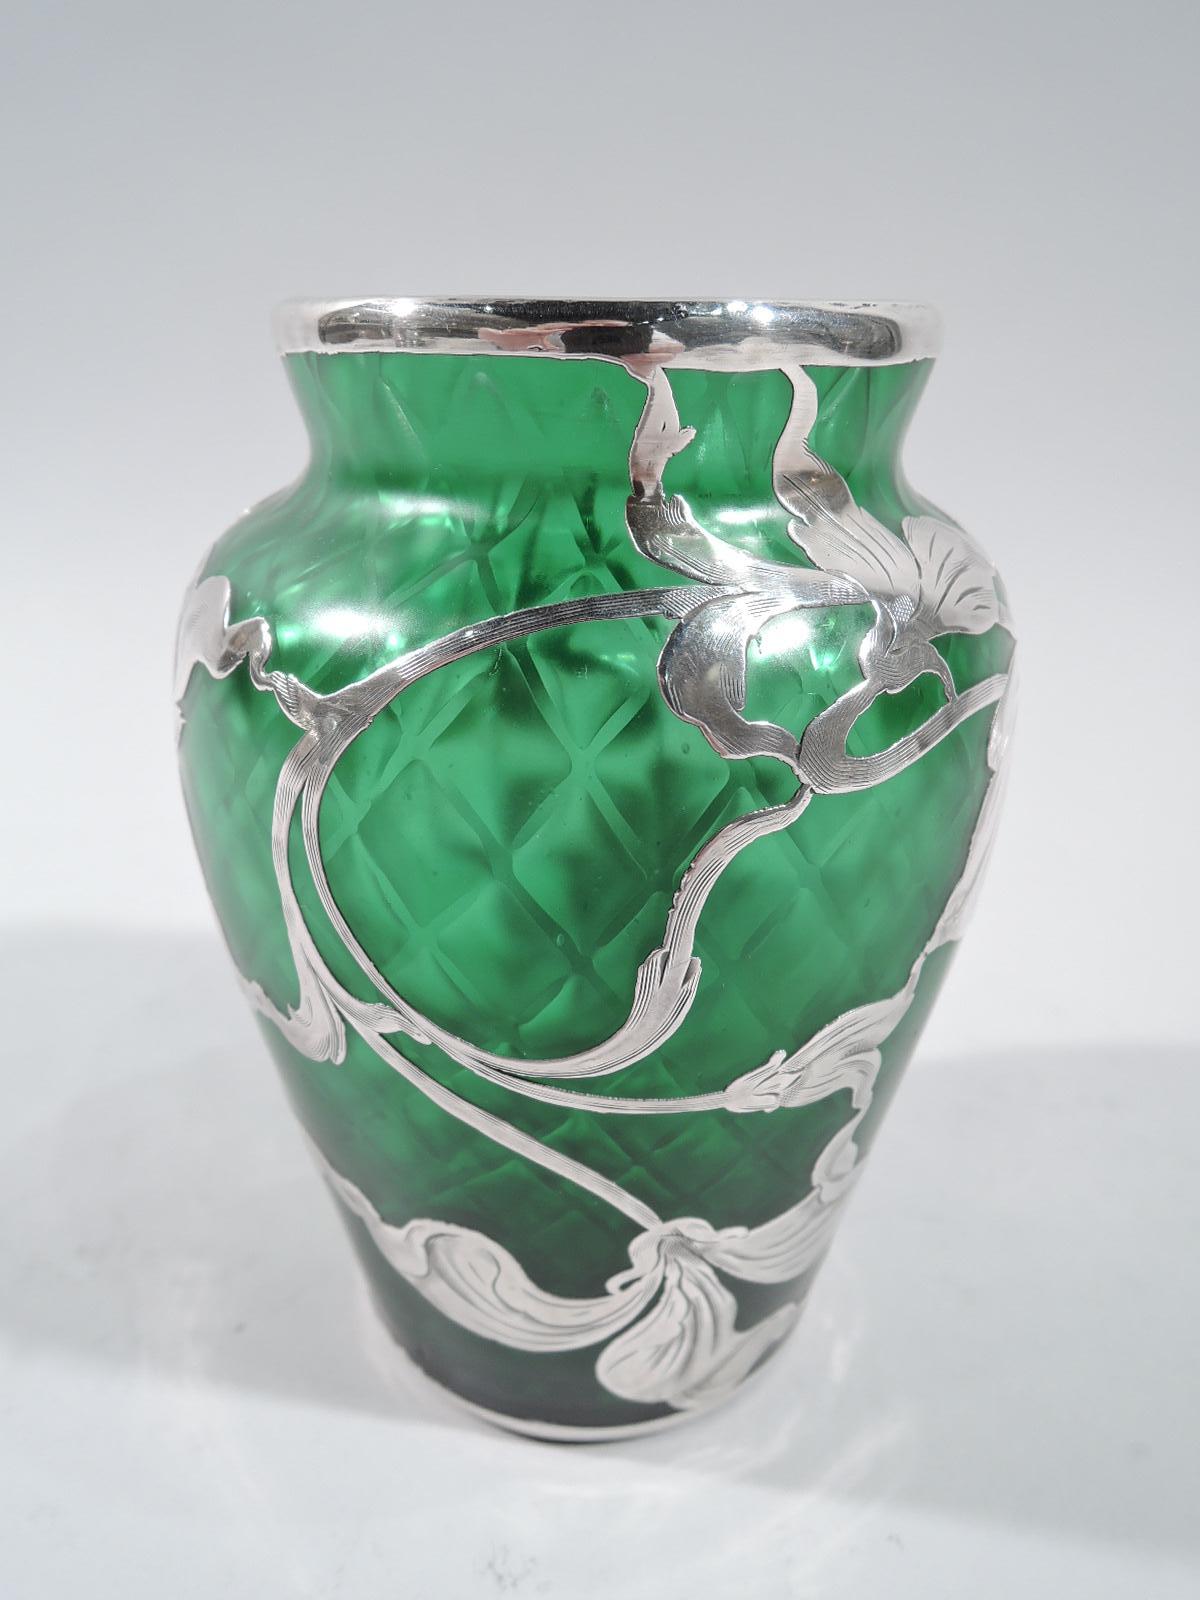 Gorgeous turn-of-the-century Art Nouveau quilted glass vase by historic maker Loetz with engraved silver overlay. Gently tapering sides and short inset neck. Loose and fluid floral overlay. An open and dynamic design with irregular petals and